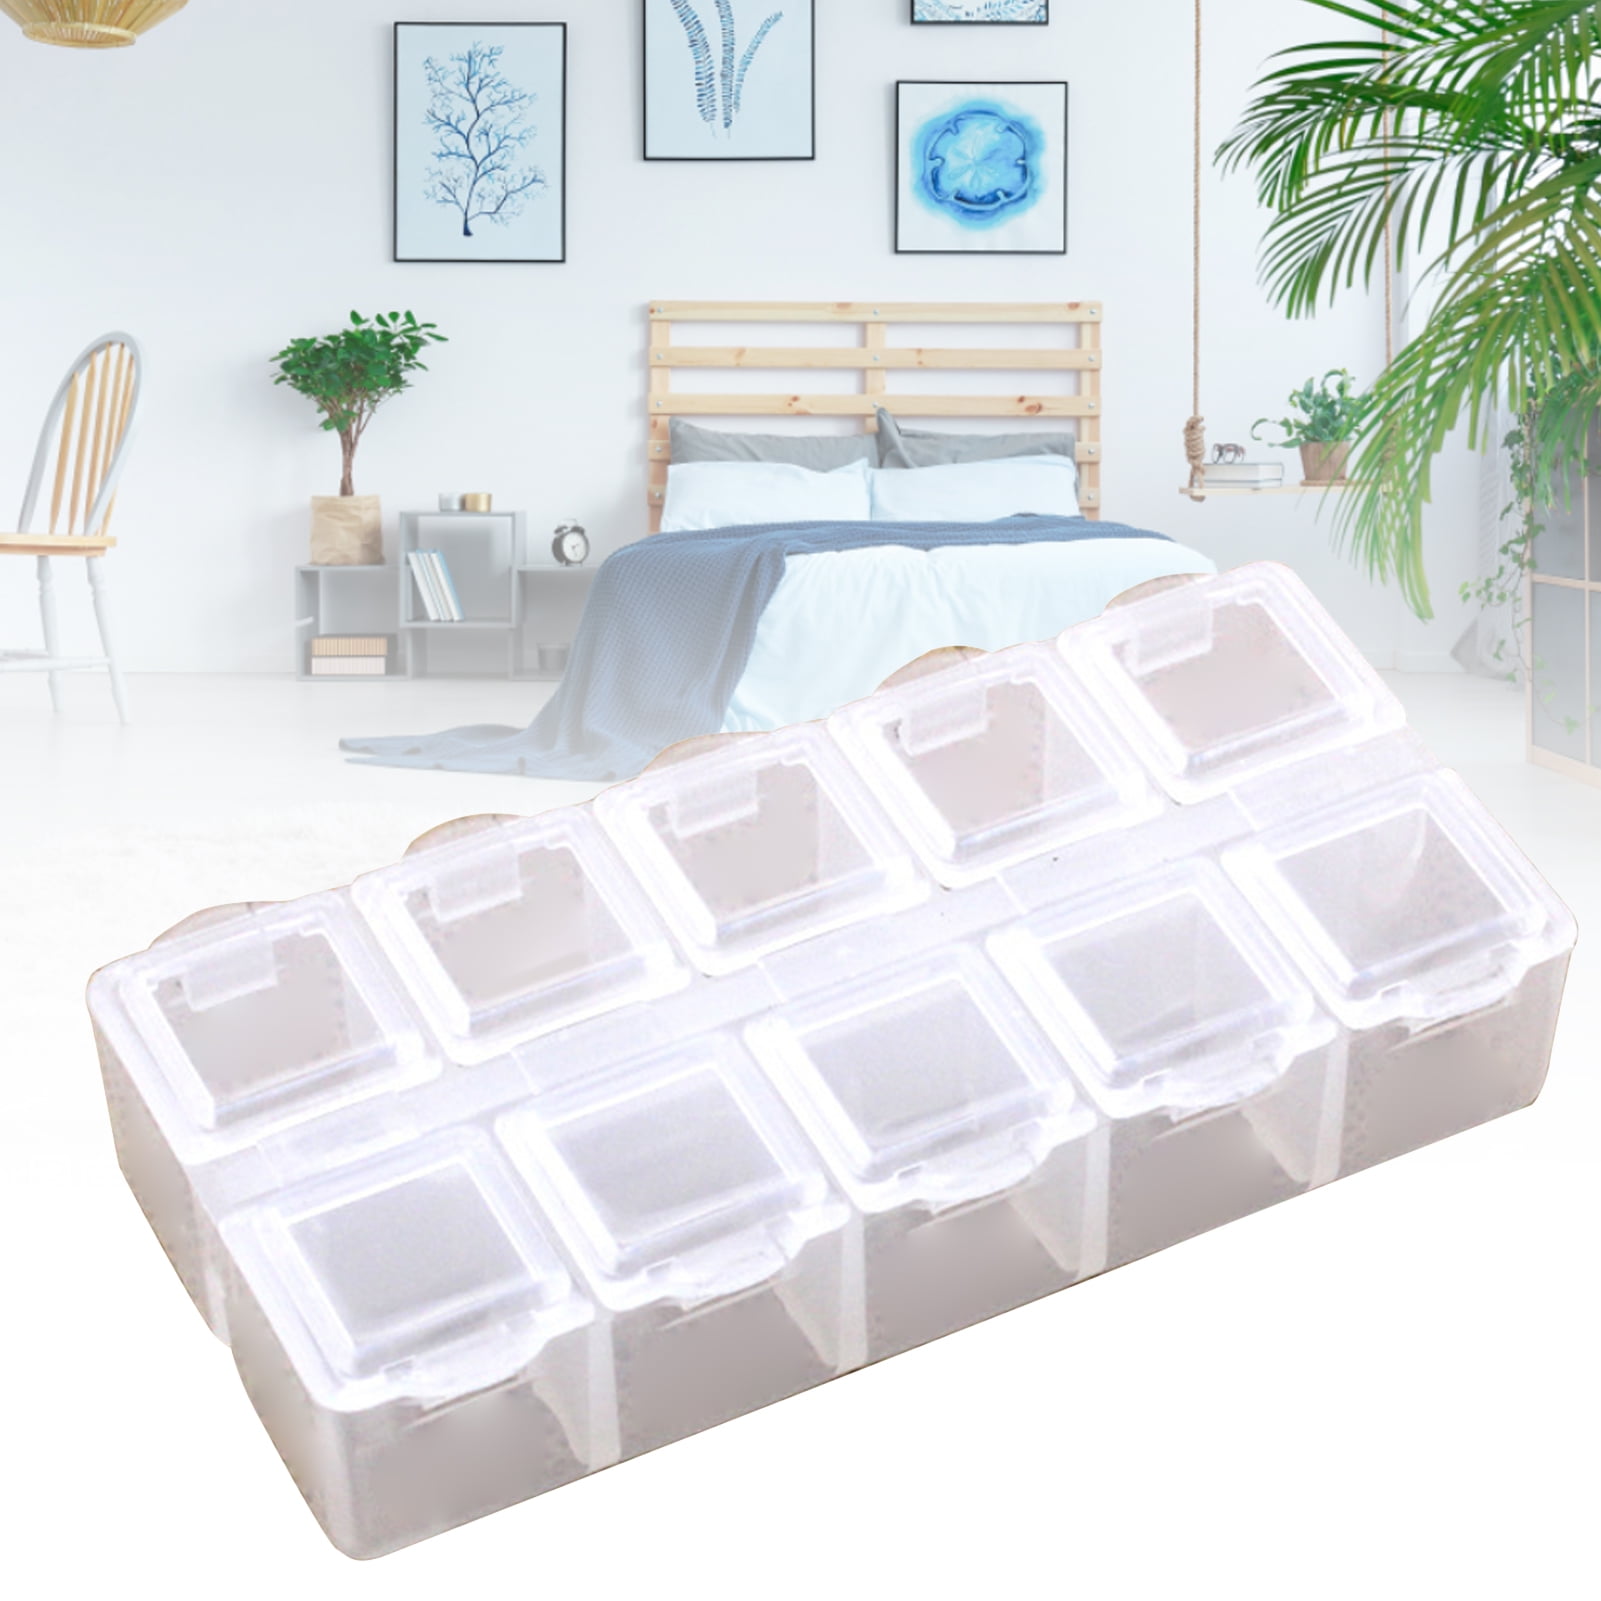 Jiaroswwei Storage Box with Lid 10 Grids Large Capacity Dust-proof